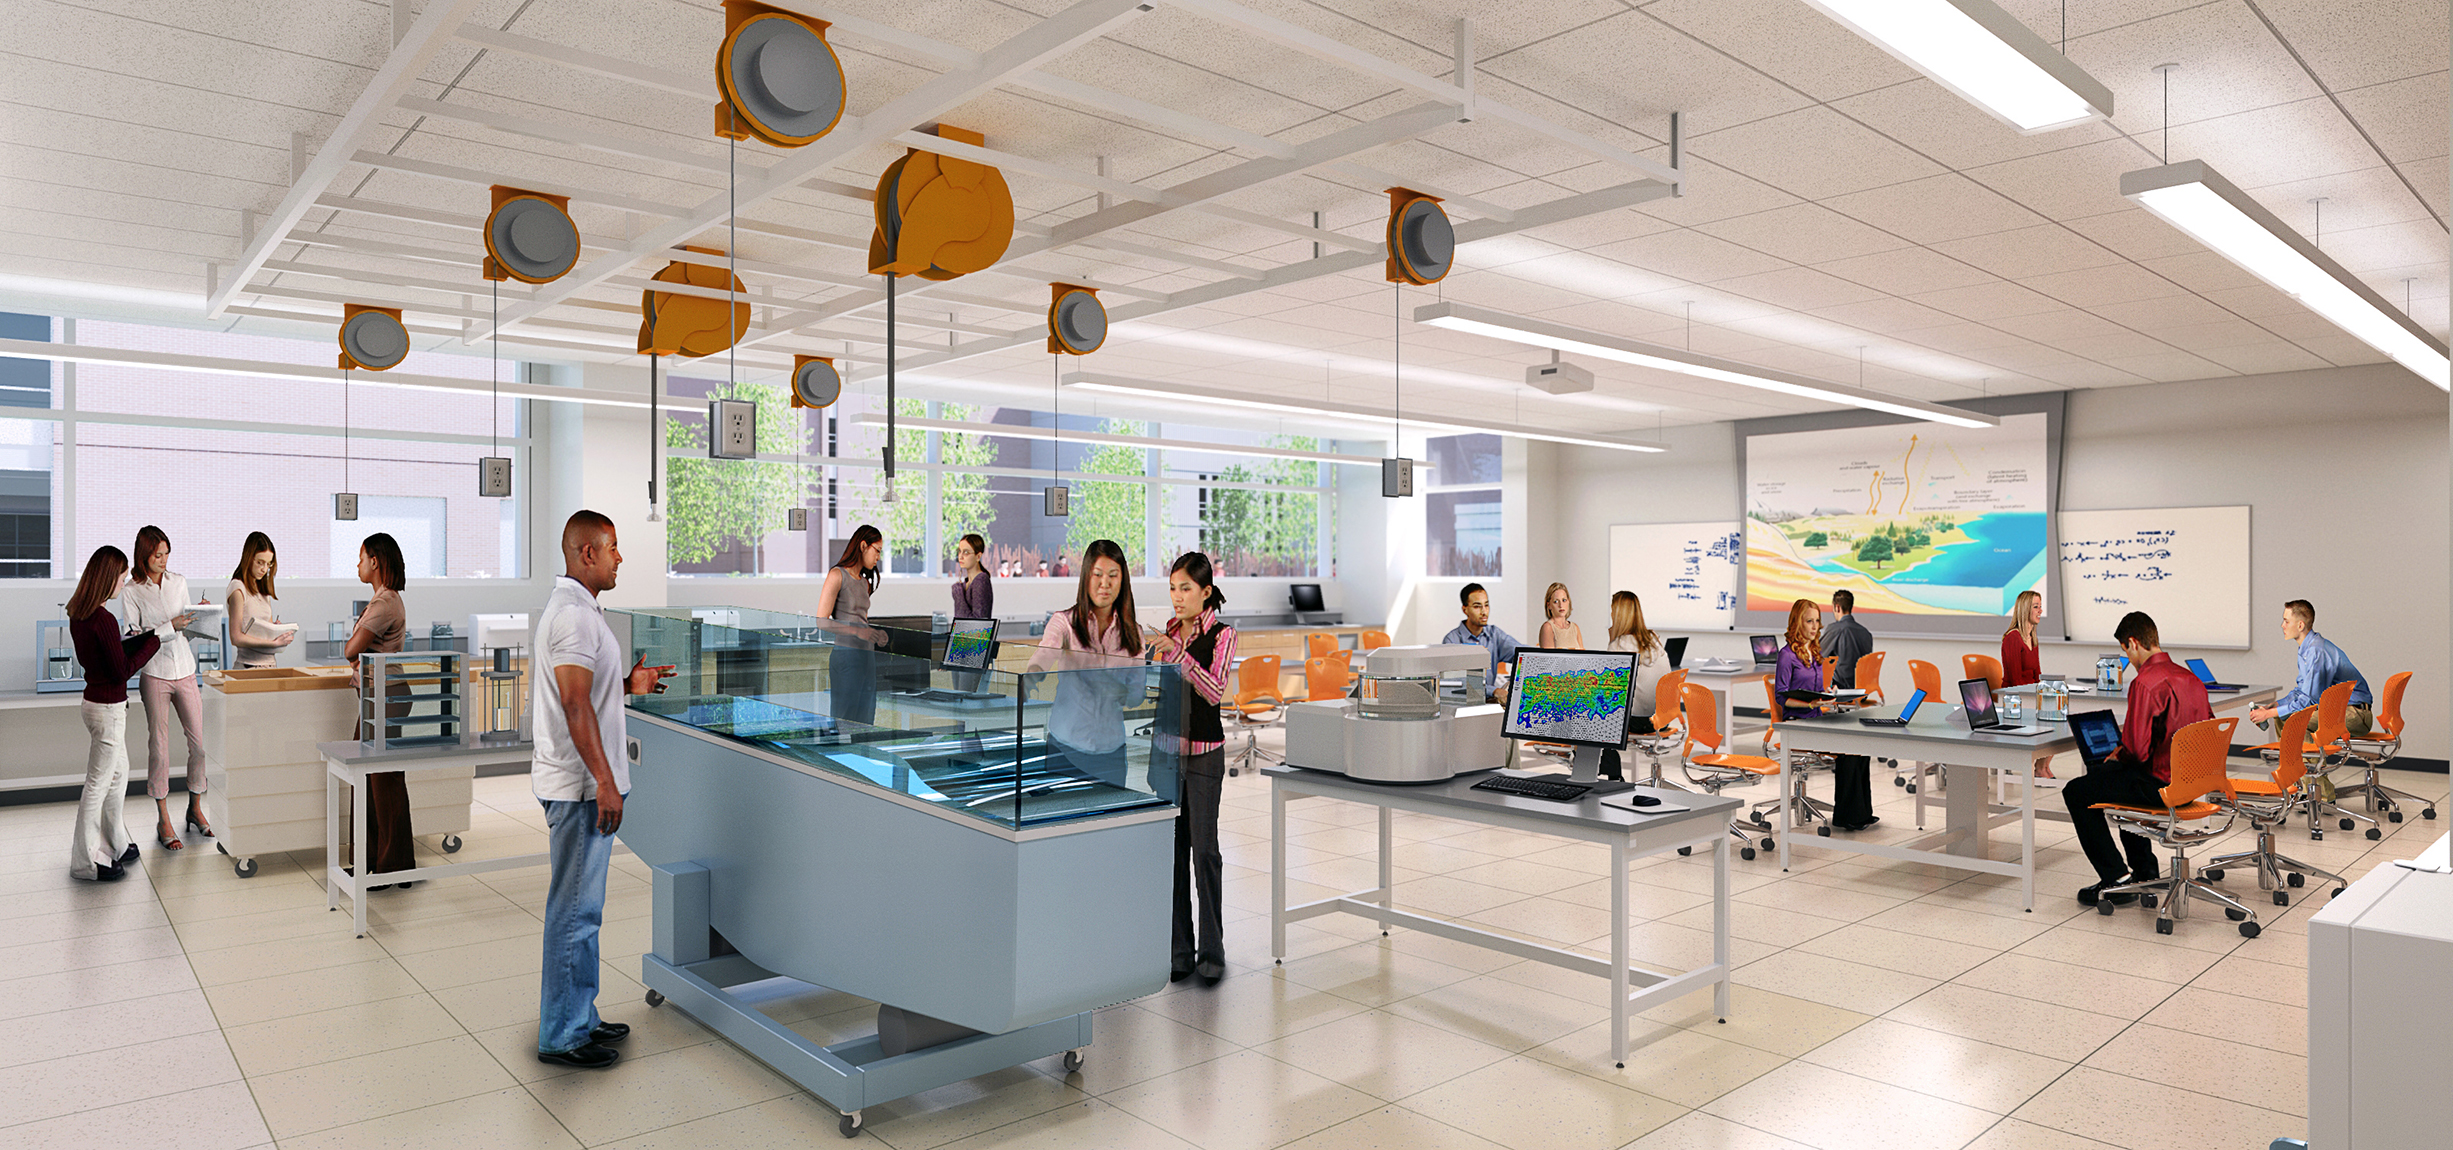 Among the many features of the Duff Center is an environmental engineering teaching lab that will provide a major resource for civil engineering students and anyone conducting experiments with water and environmental pollutants.